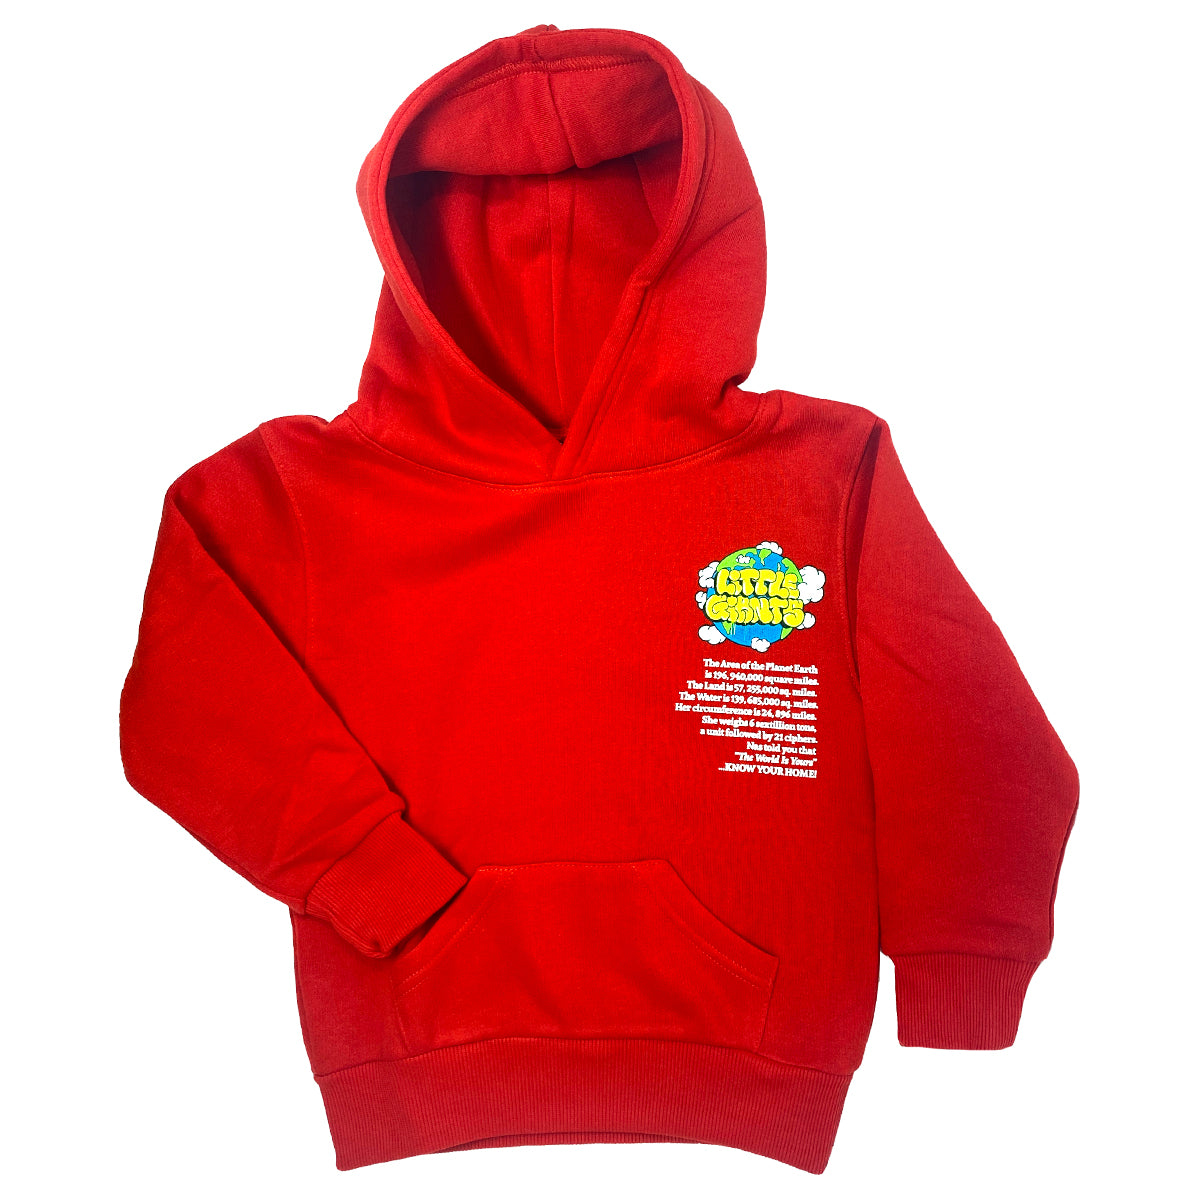 Know Your Home Hoodie (Red)